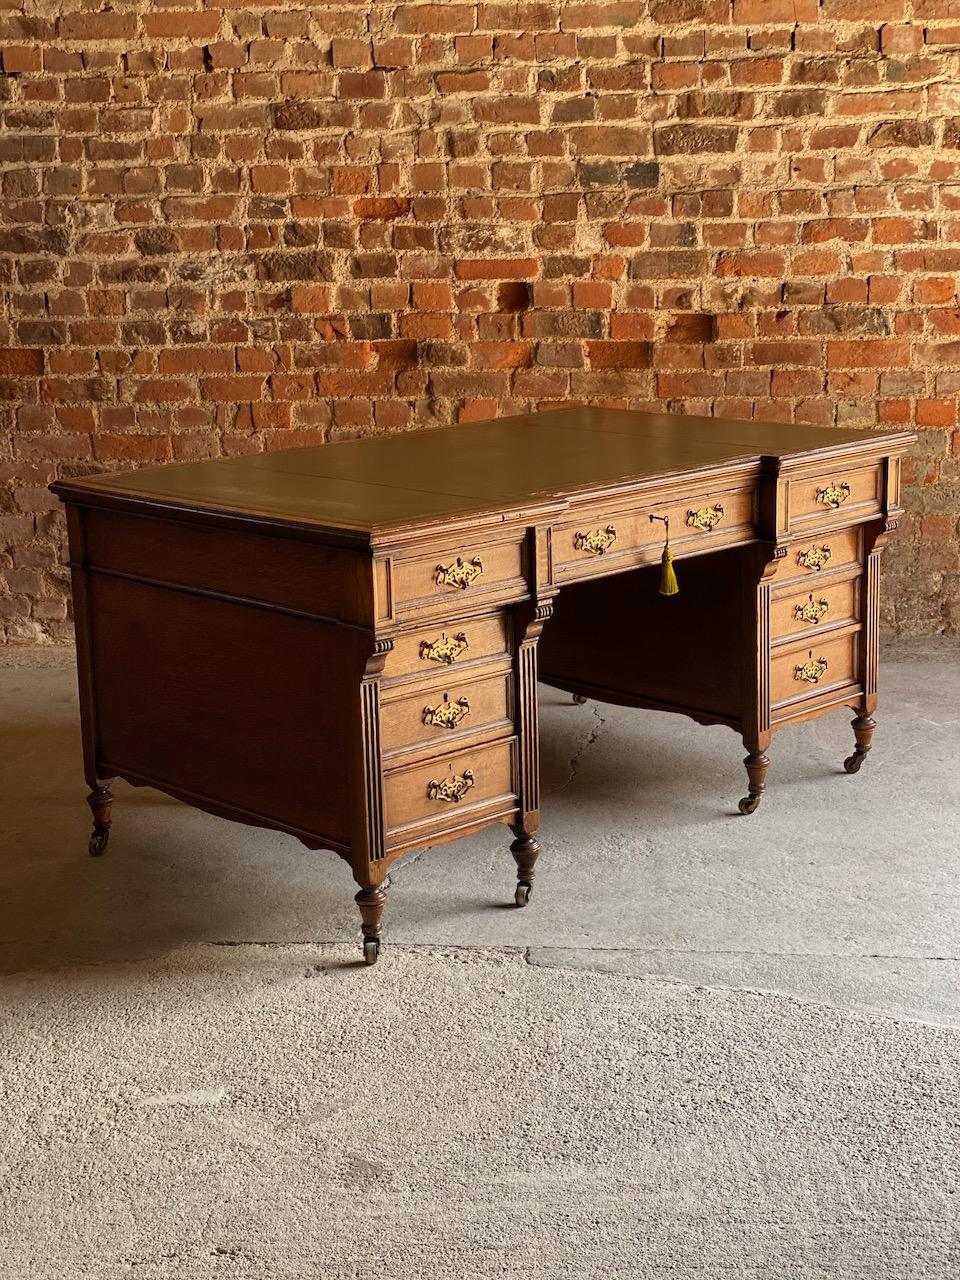 Antique partners desk oak 19th century Victorian, circa 1850

Stunning 19th century solid oak breakfront twin pedestal partners desk circa 1850, the deep rectangular top with a sumptuous olive green and gilt skived and tooled leather inset over